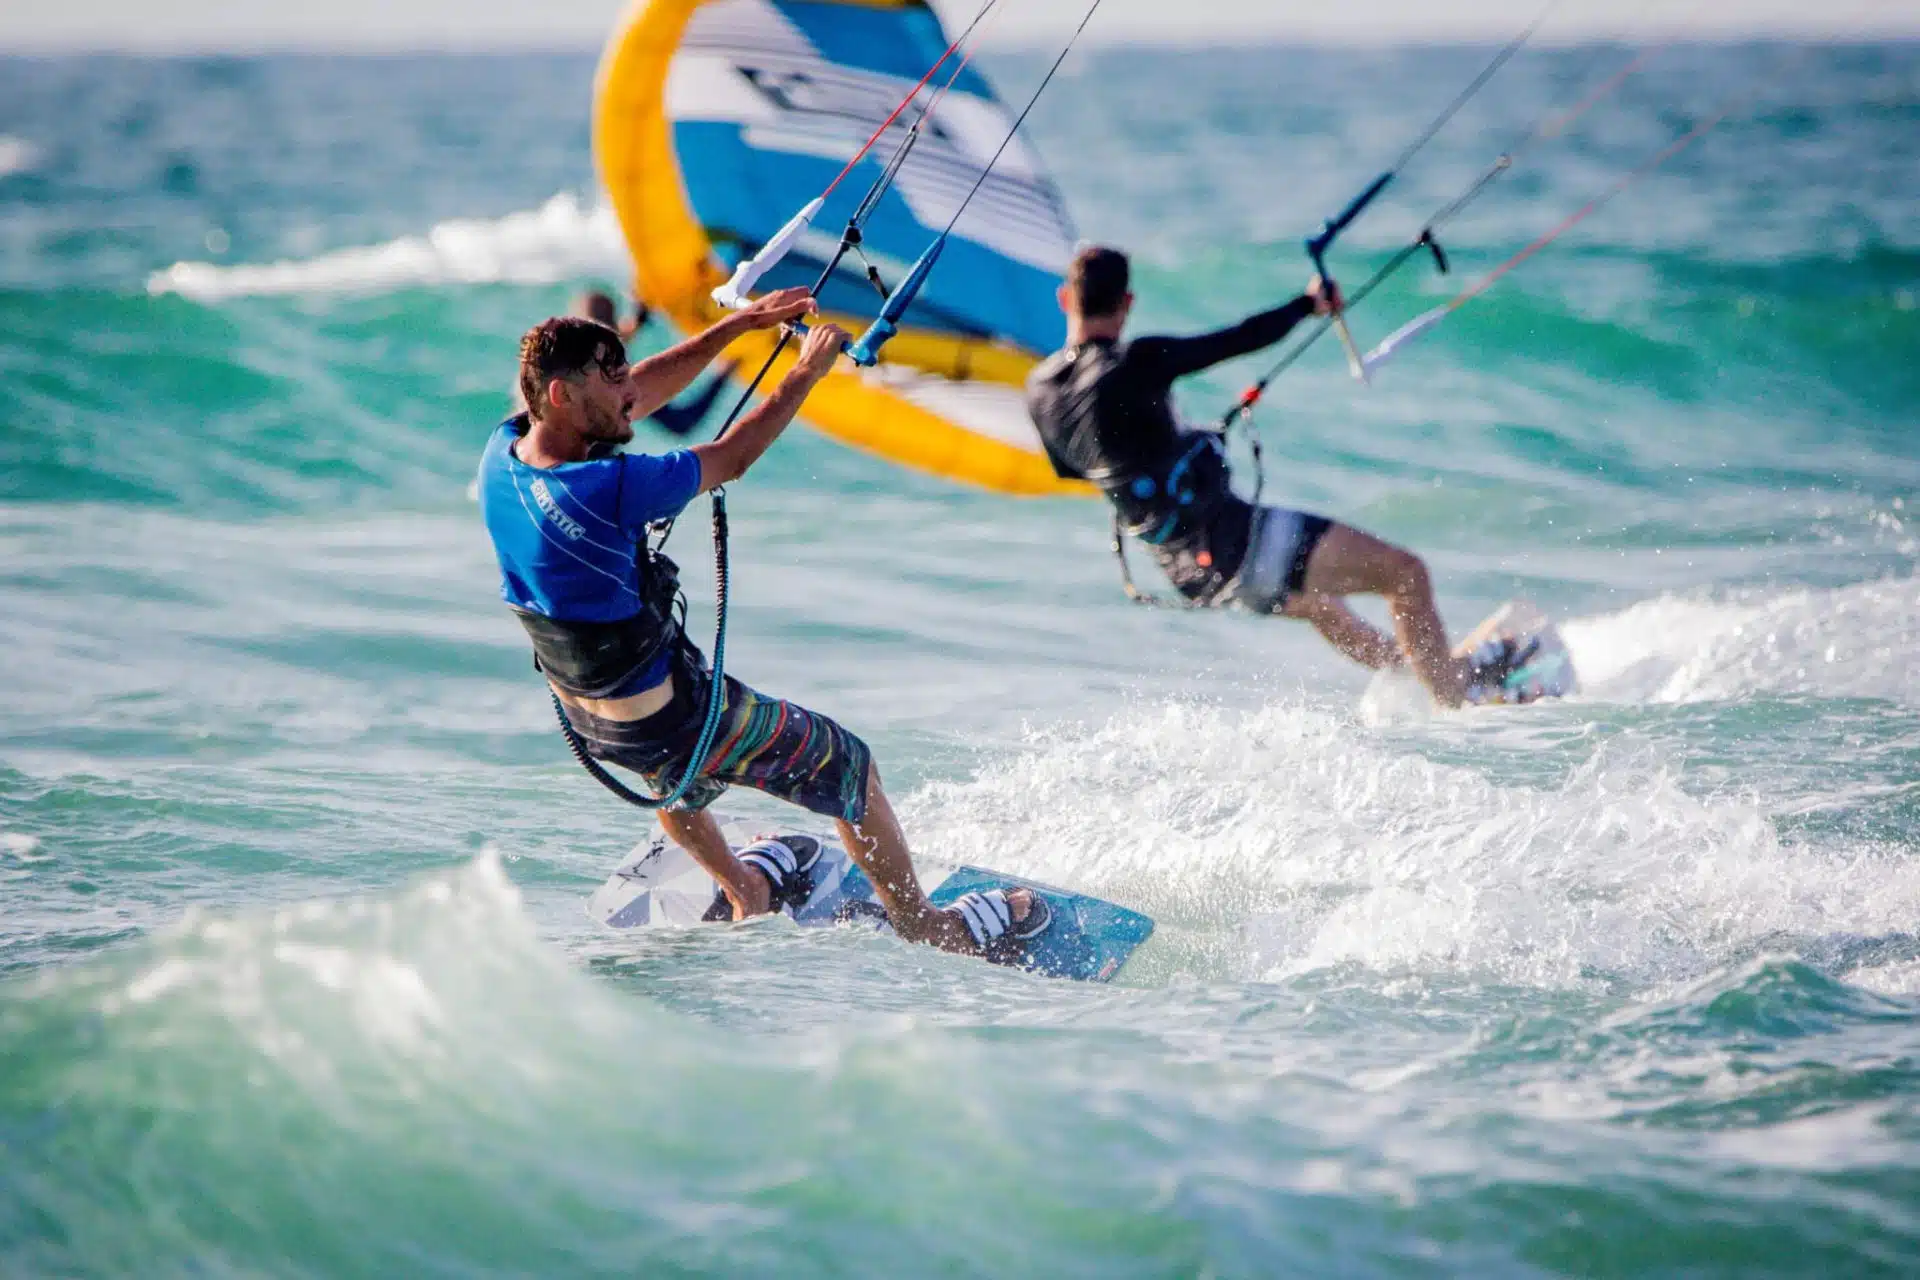 why "surfcycle" at qiryat yam is the best place for watersport at israel